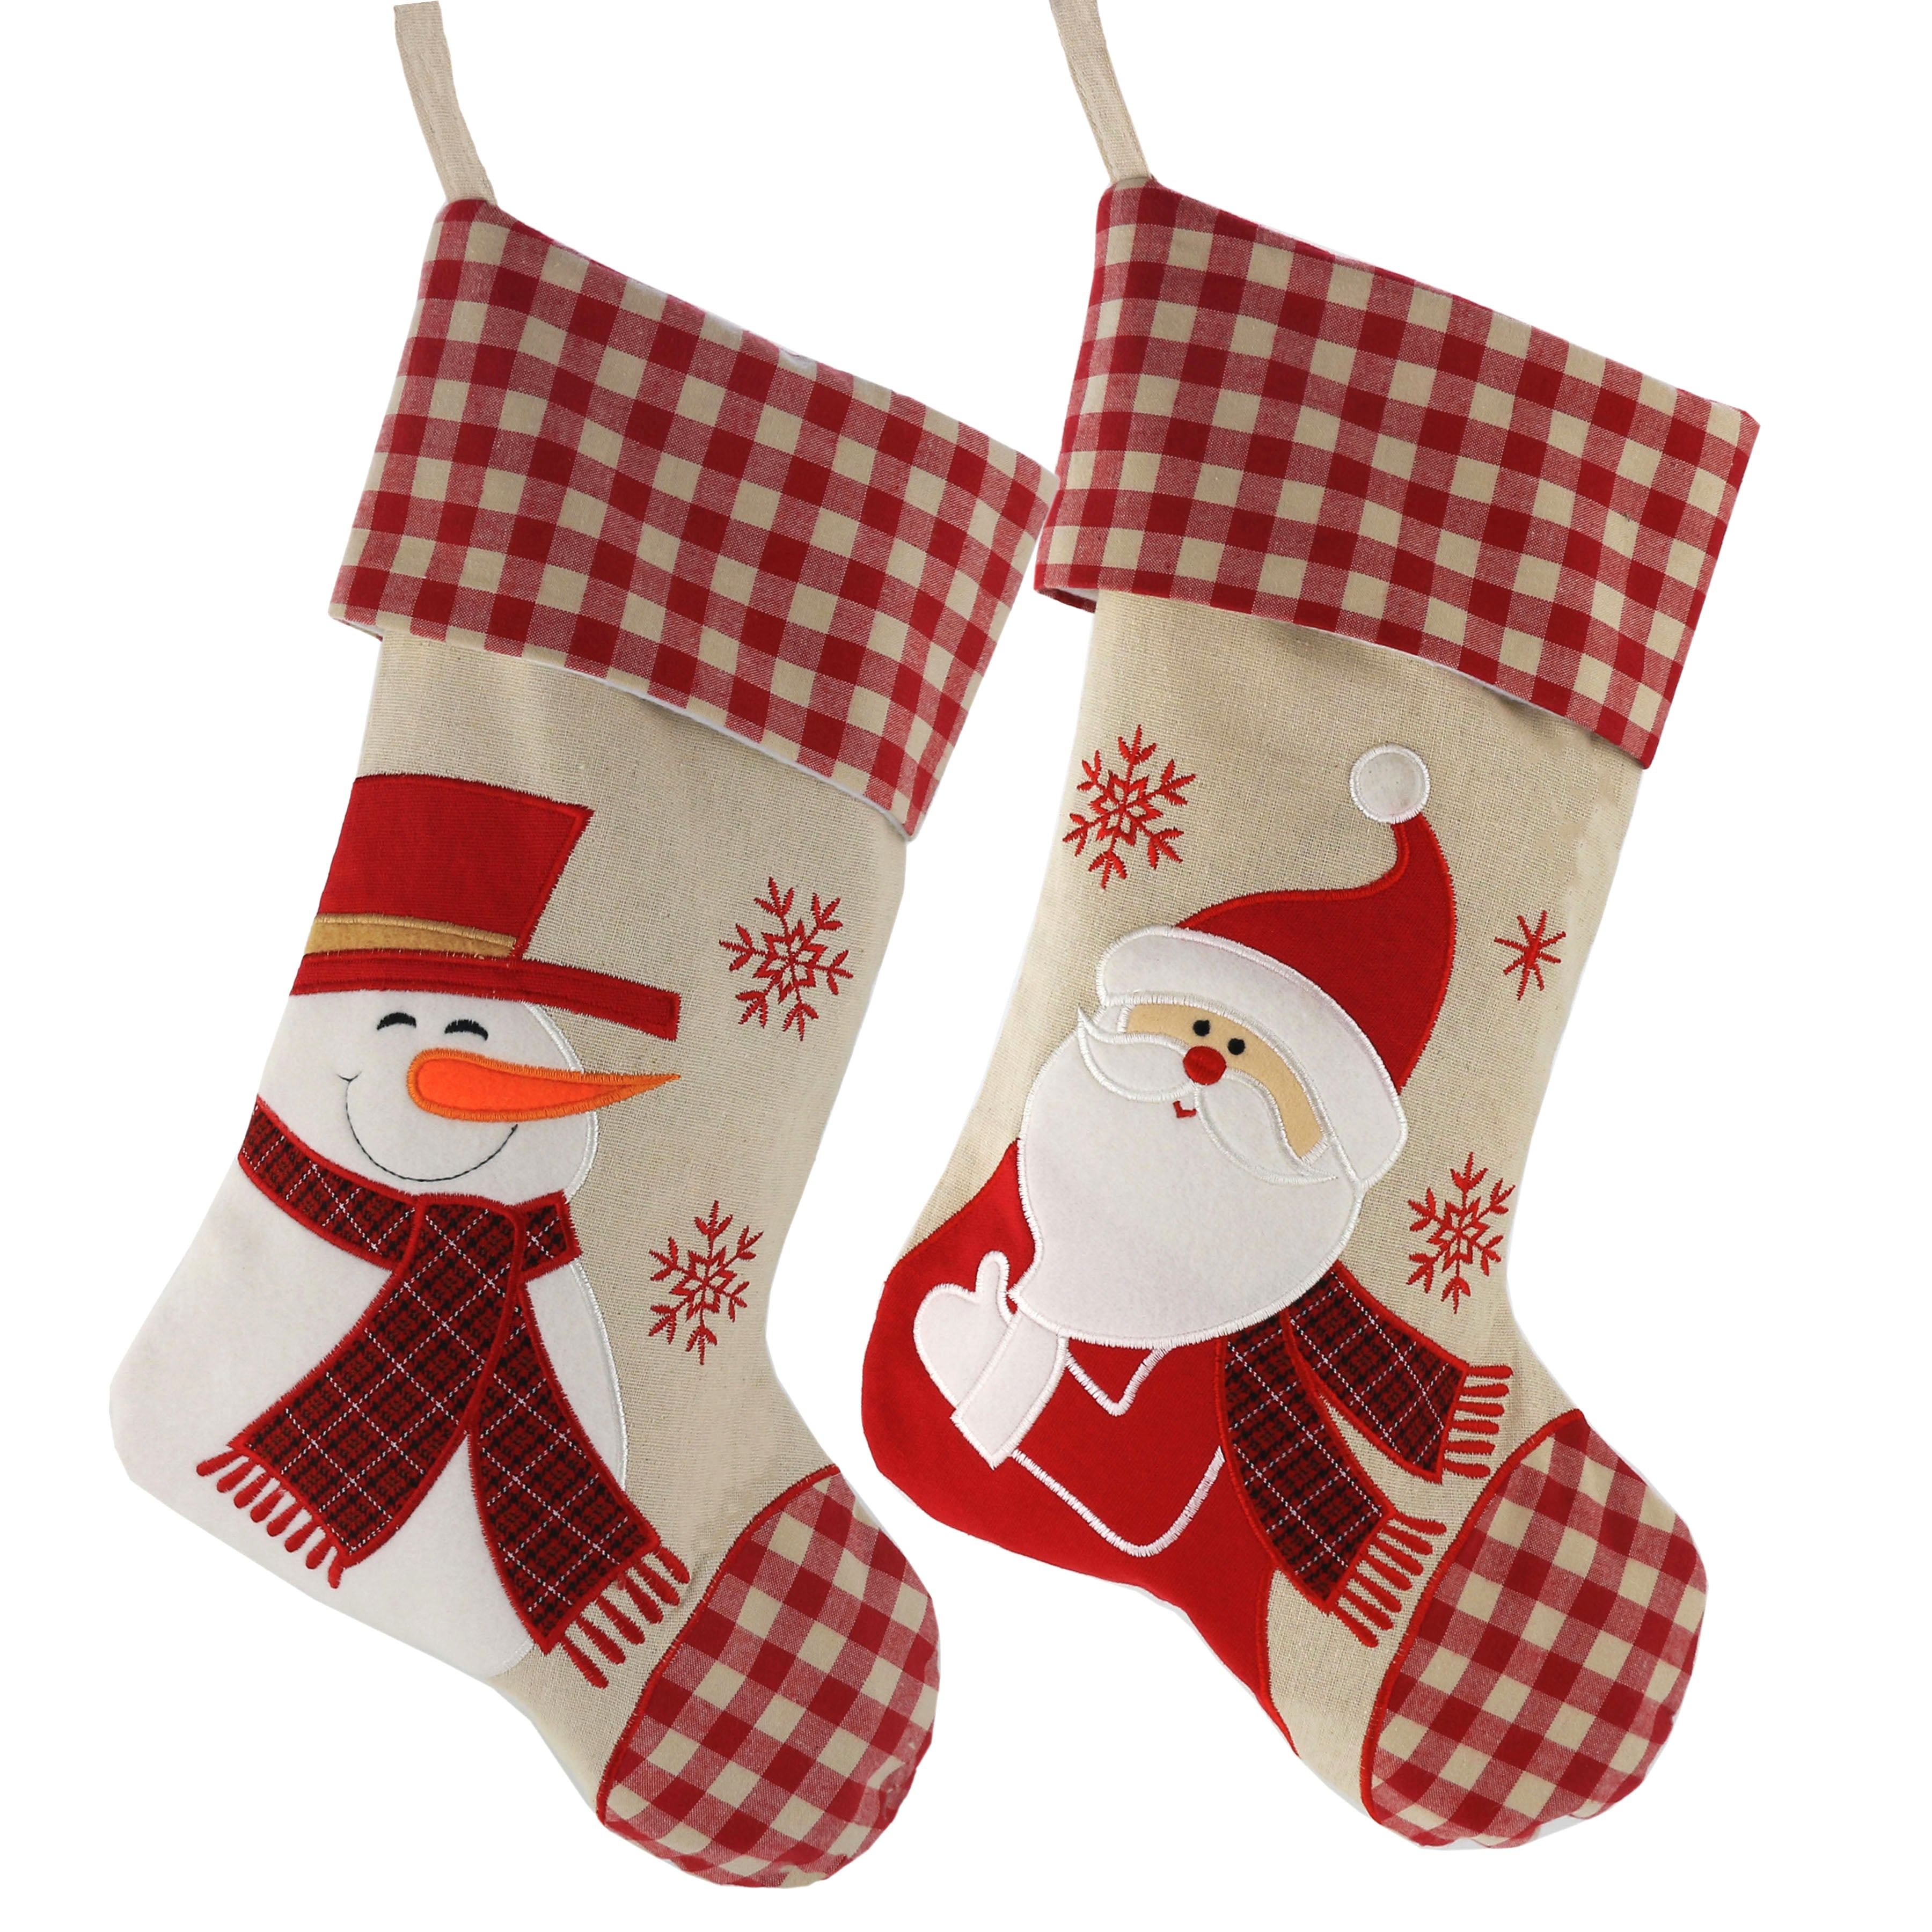 Christmas stockings set of 2 classic red palid, 17'' | Bstaofy - Glow Guards